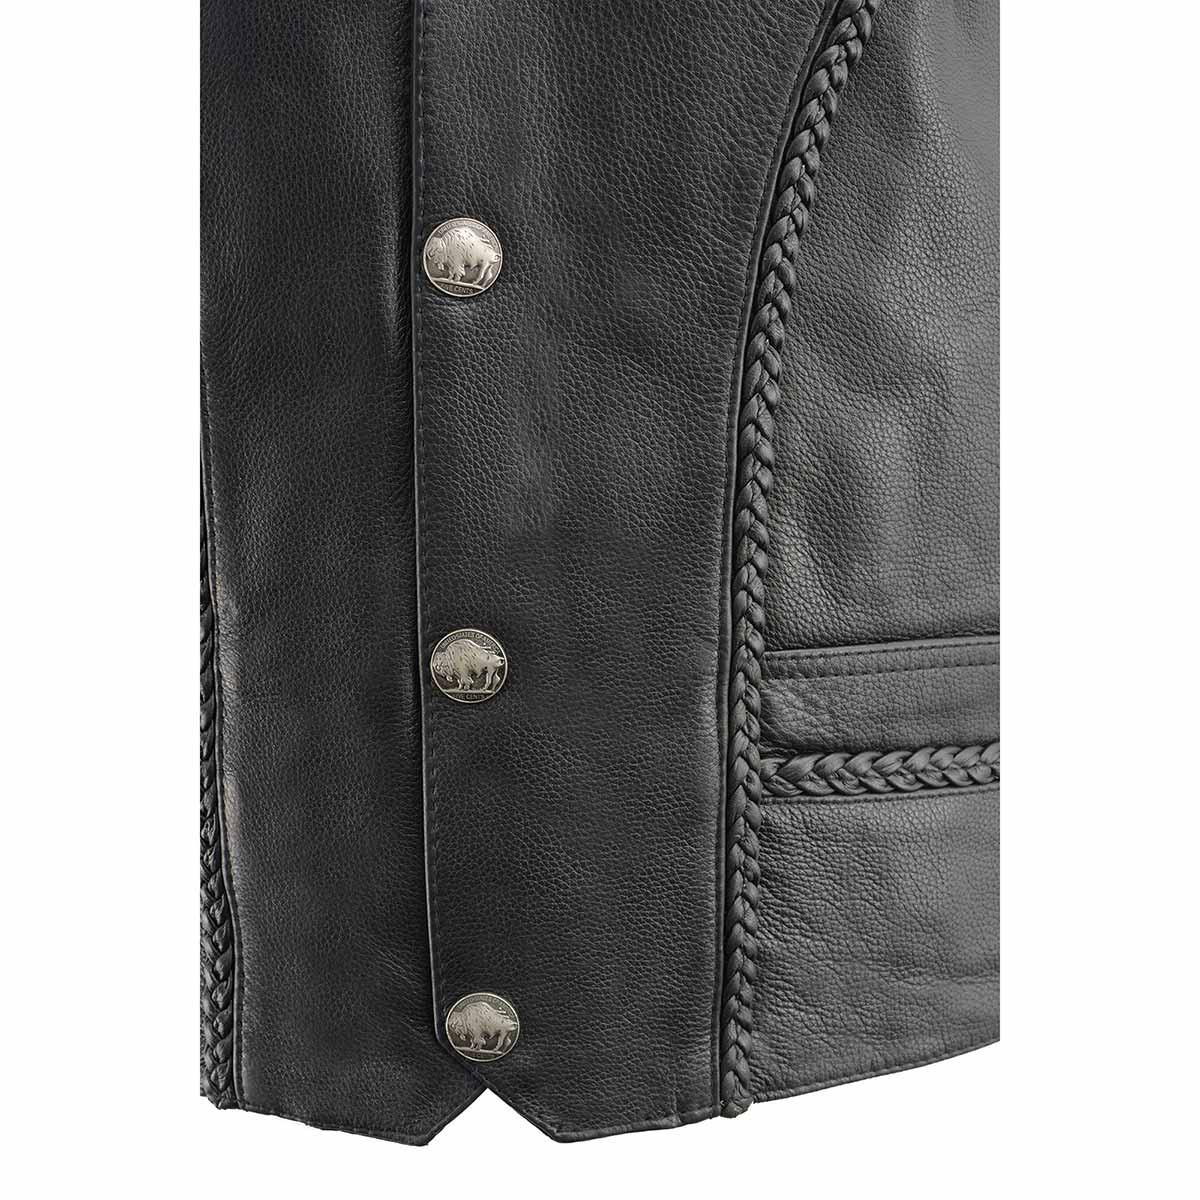 Milwaukee Leather ML1359 Men's Black Naked Leather Side Lace Motorcycle Rider Vest w/ Buffalo Nickel Snaps Closure